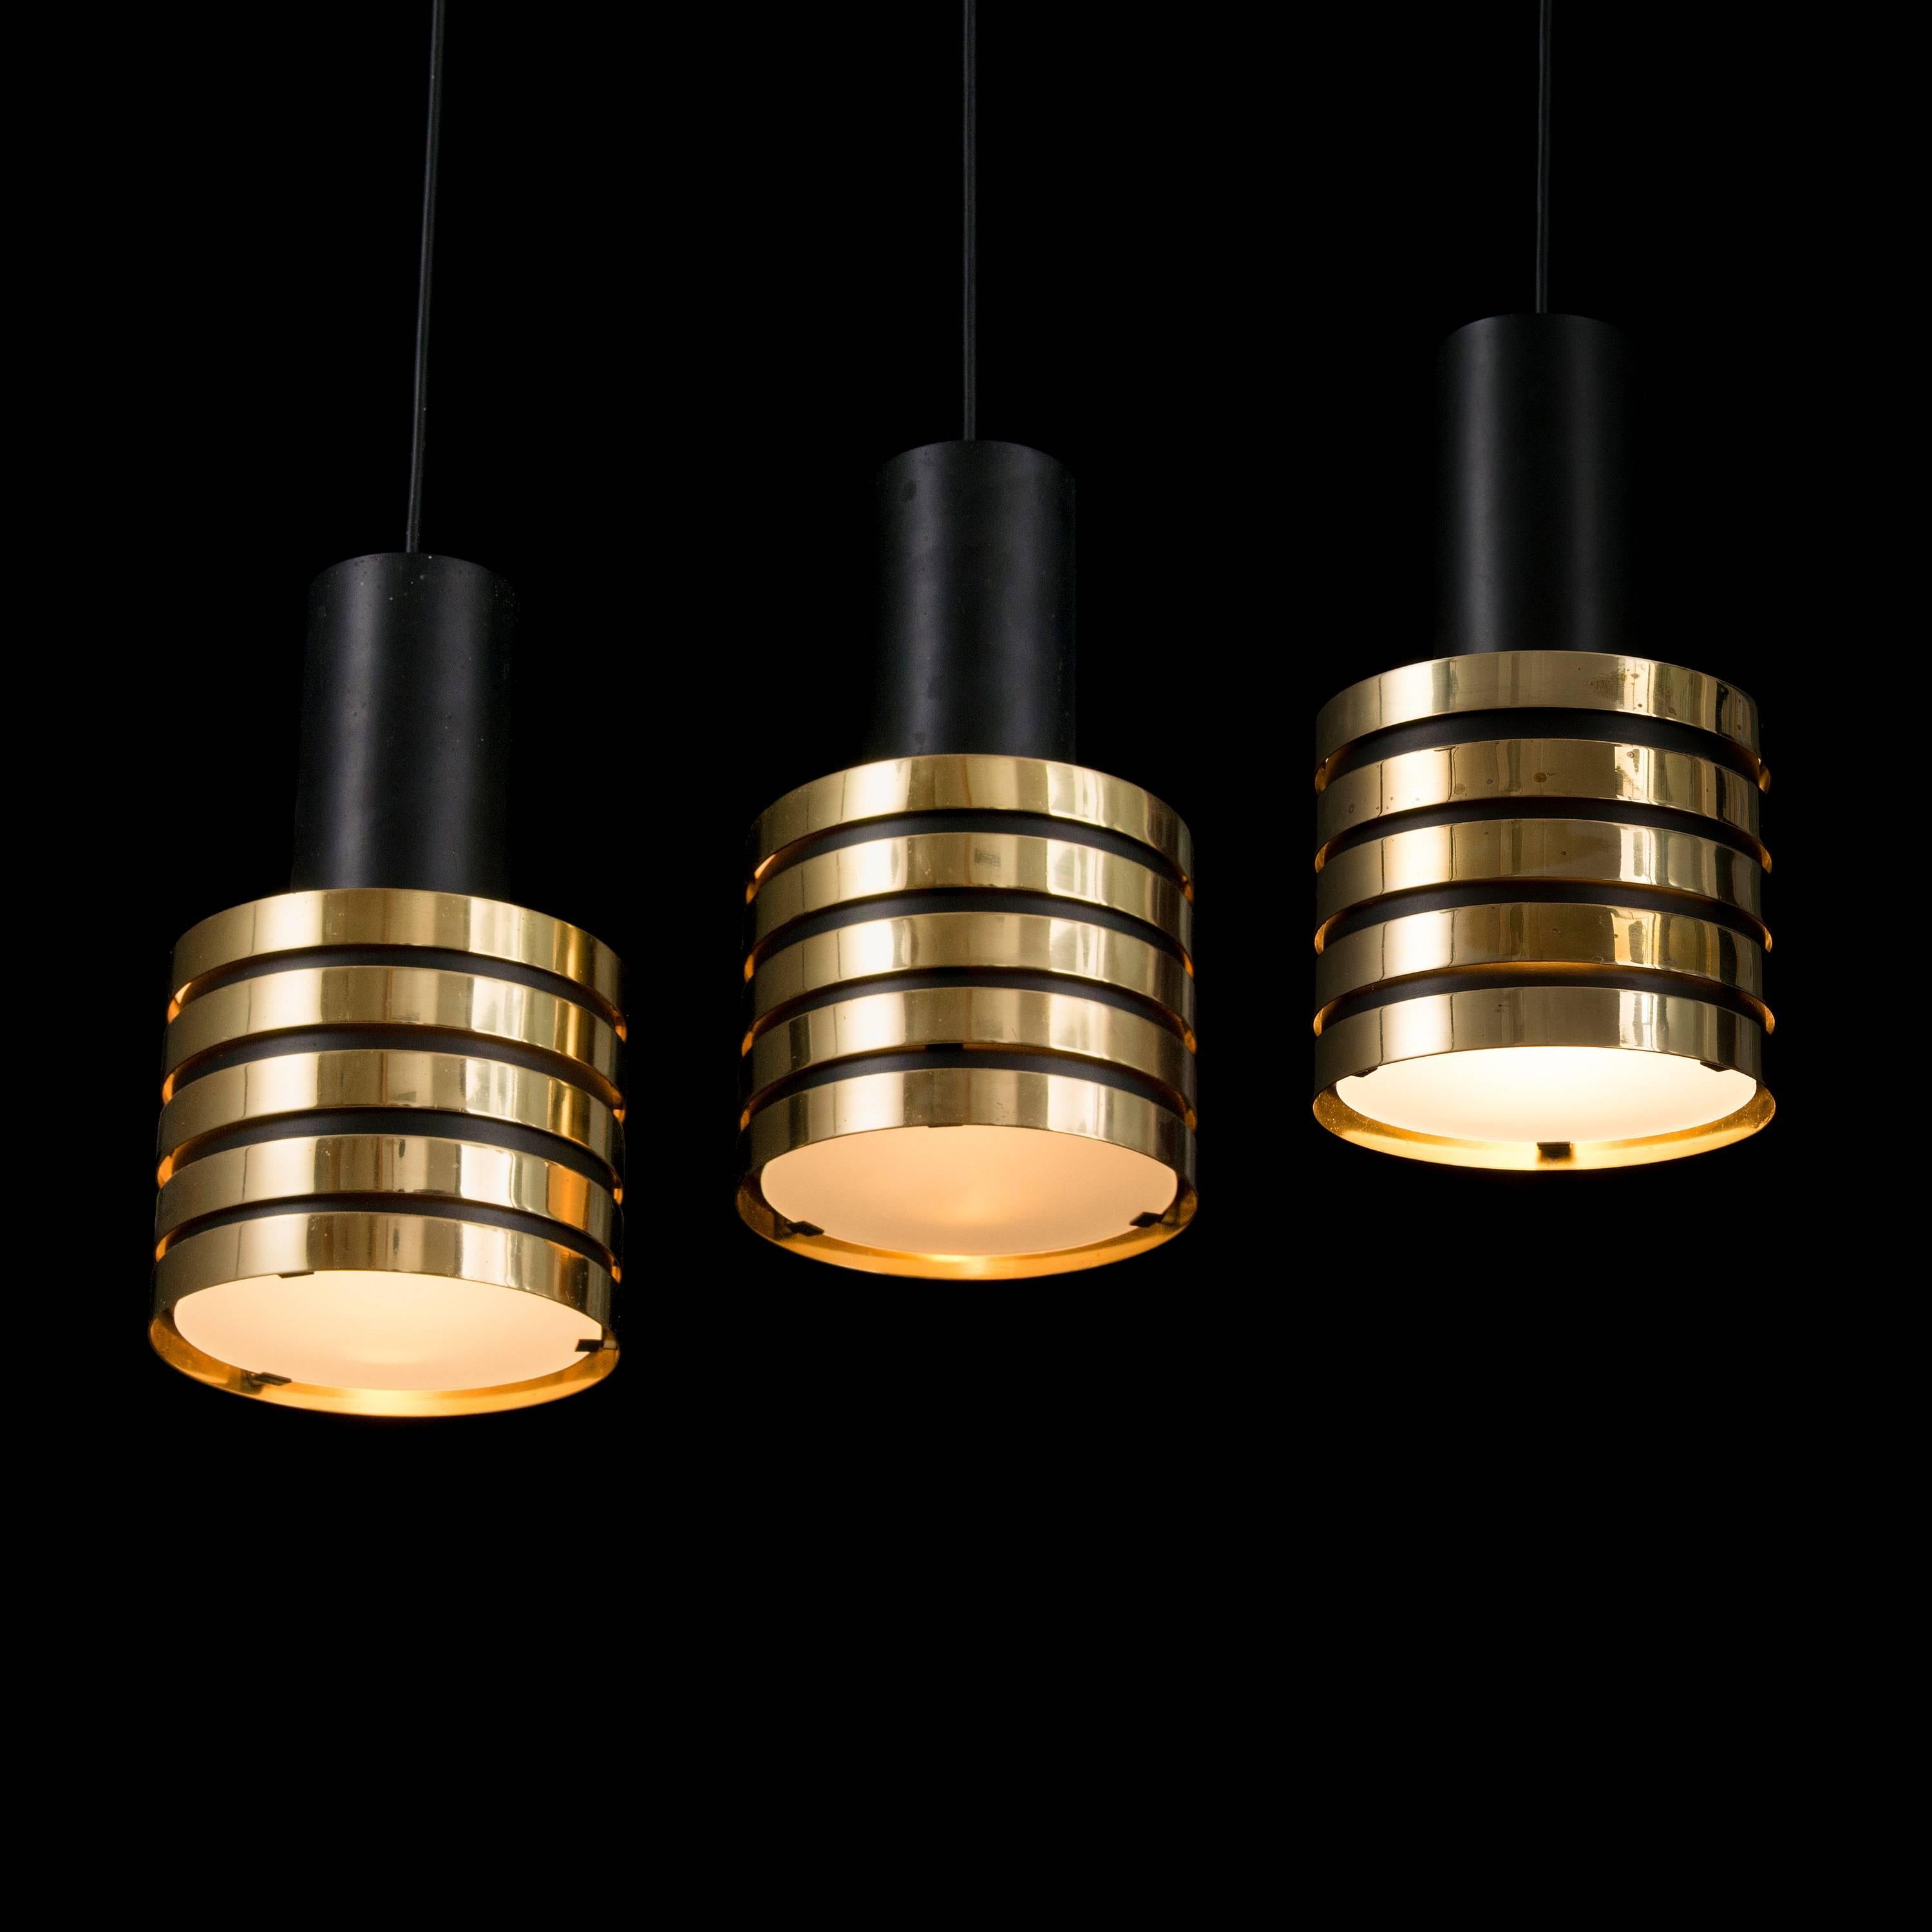 1950s Paavo Tynell K2-49 brass and glass pendants for Taito Oy. Executed in brass, painted metal and opaline glass. Professionally updated wiring for US electrical, each pendant accommodates a single medium base 75 watt incandescent bulb (higher